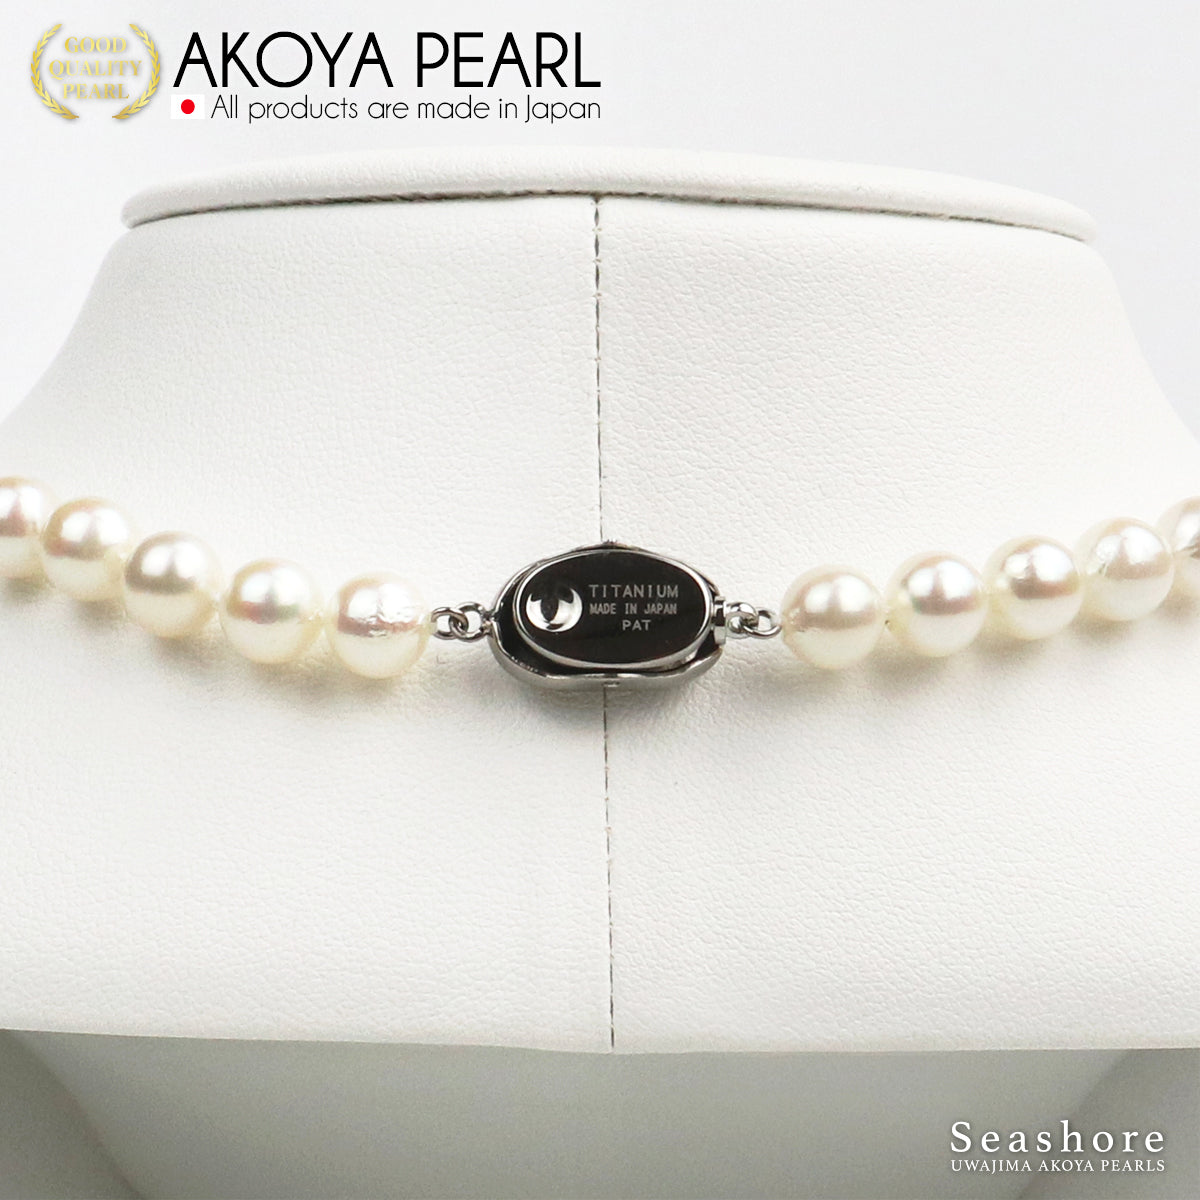 [Metal Allergy Compatible] Akoya Pearl Formal Necklace Set of 2 [8.0-8.5mm] (Earrings/Non-pierced Earrings) Formal Set with Certificate of Authenticity and Storage Case